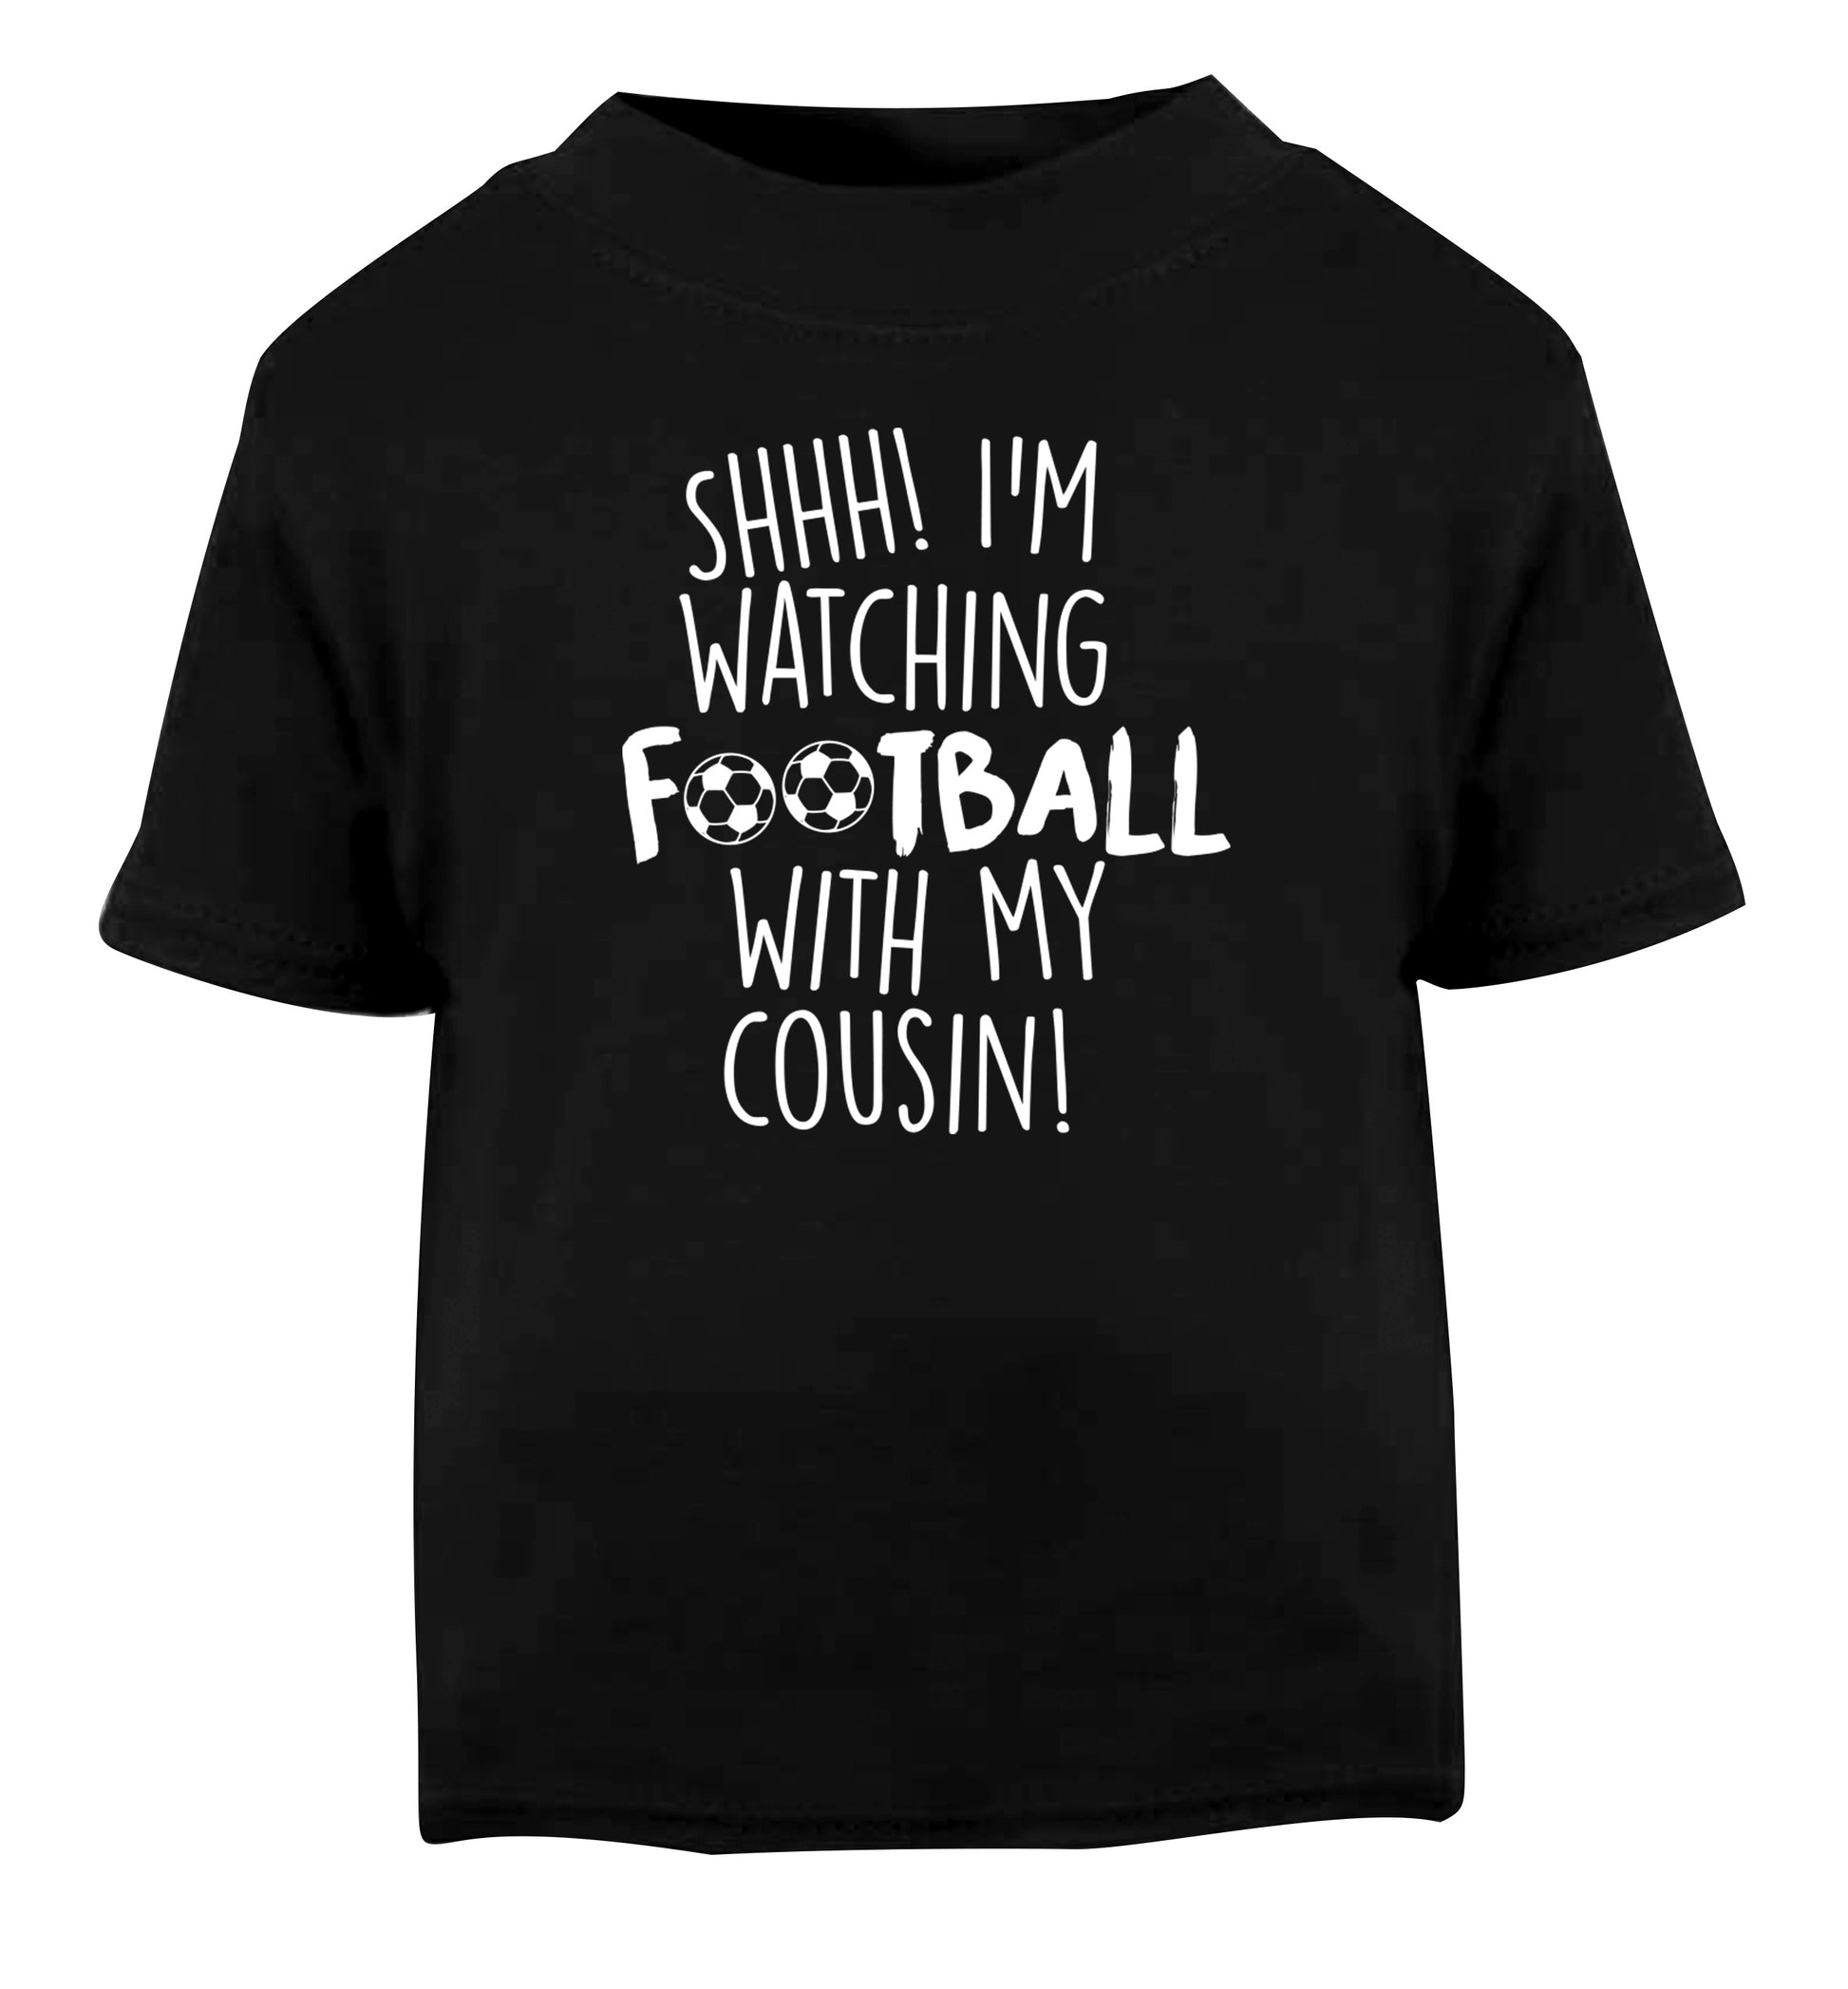 Shhh I'm watching football with my cousin Black Baby Toddler Tshirt 2 years